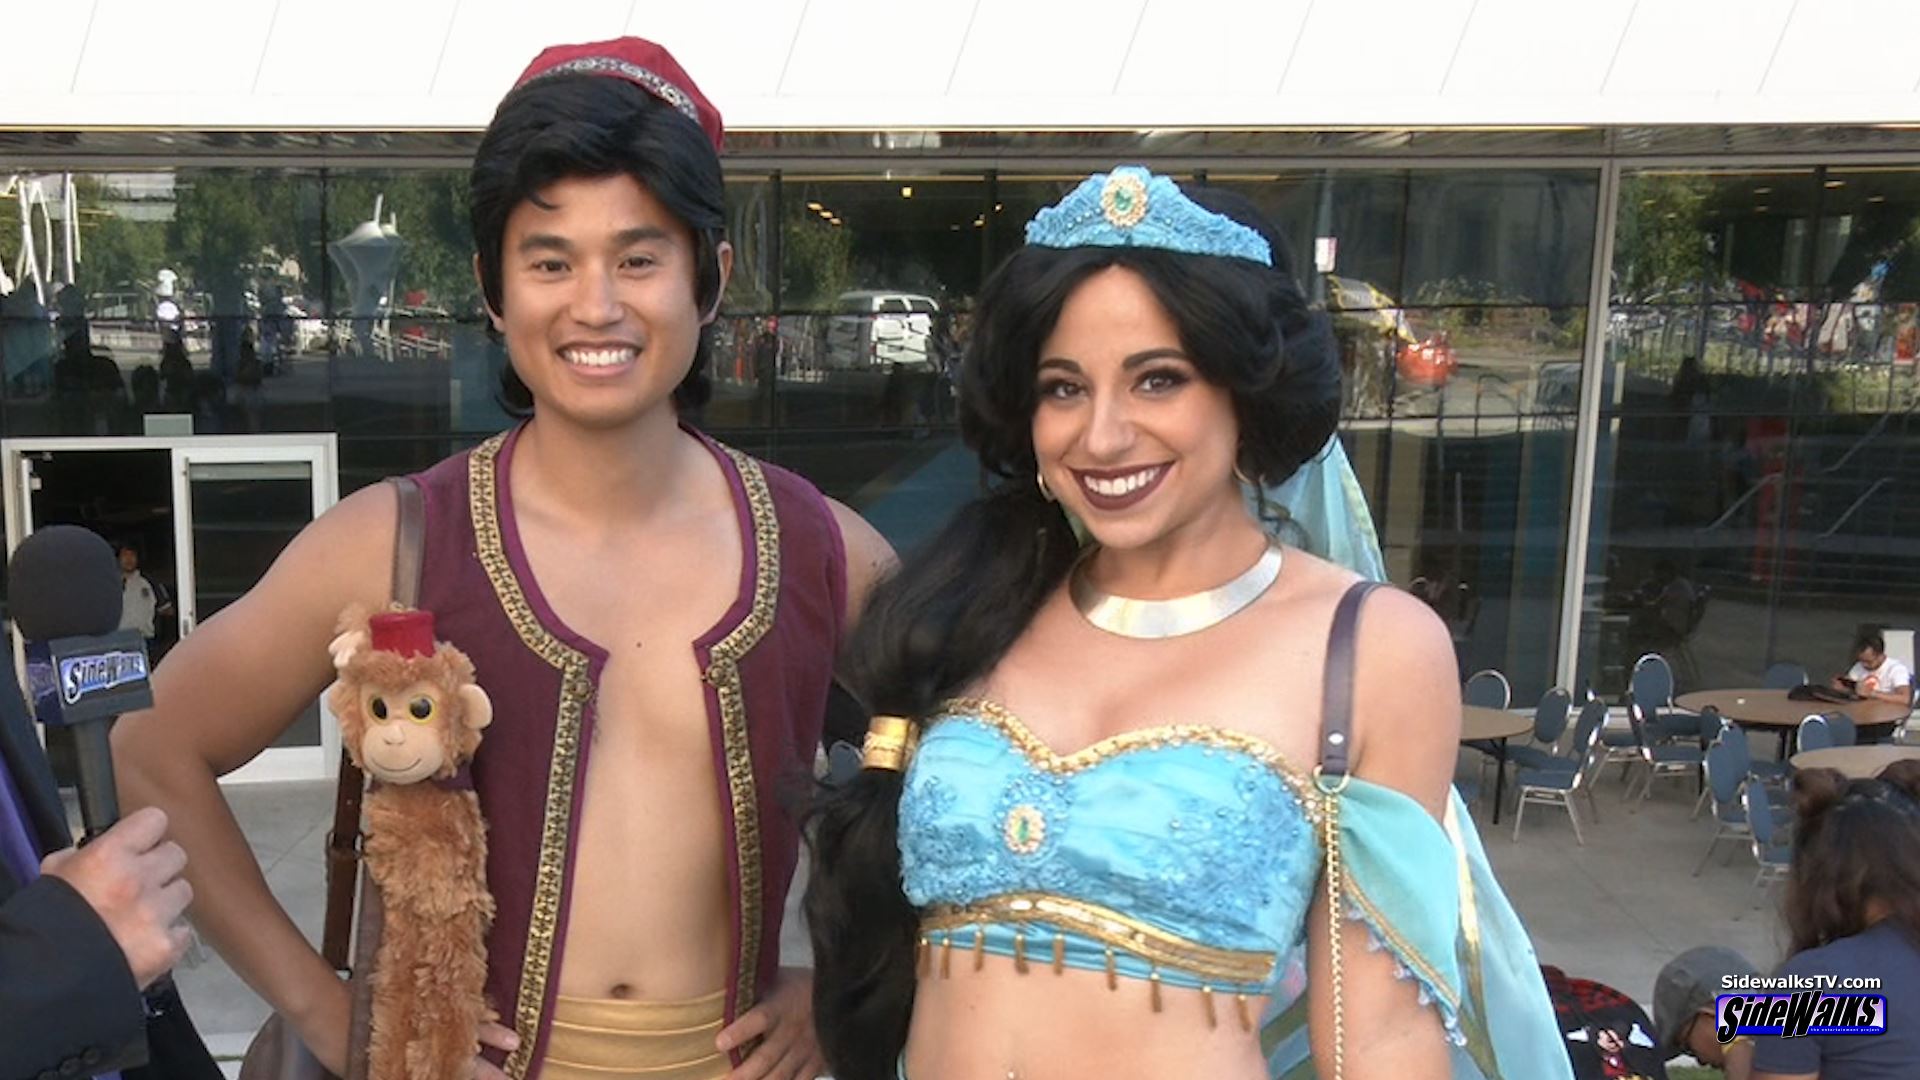 Image of Cosplayers Just Jea and Anthony